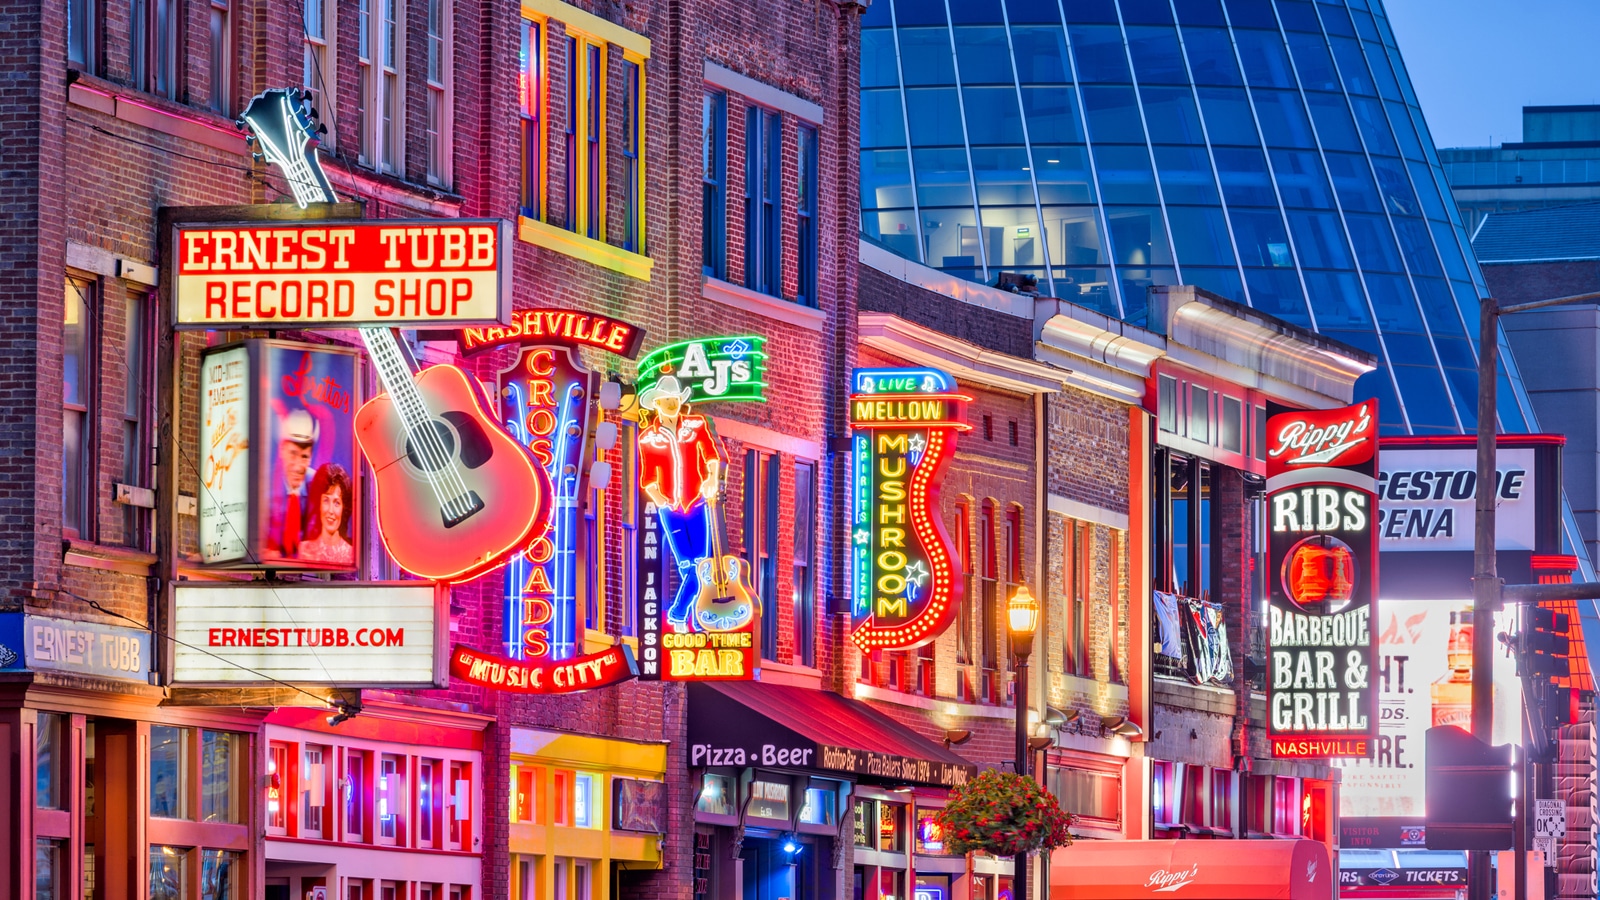 Live Music Venues On Lower Broadway - Nashville At Night